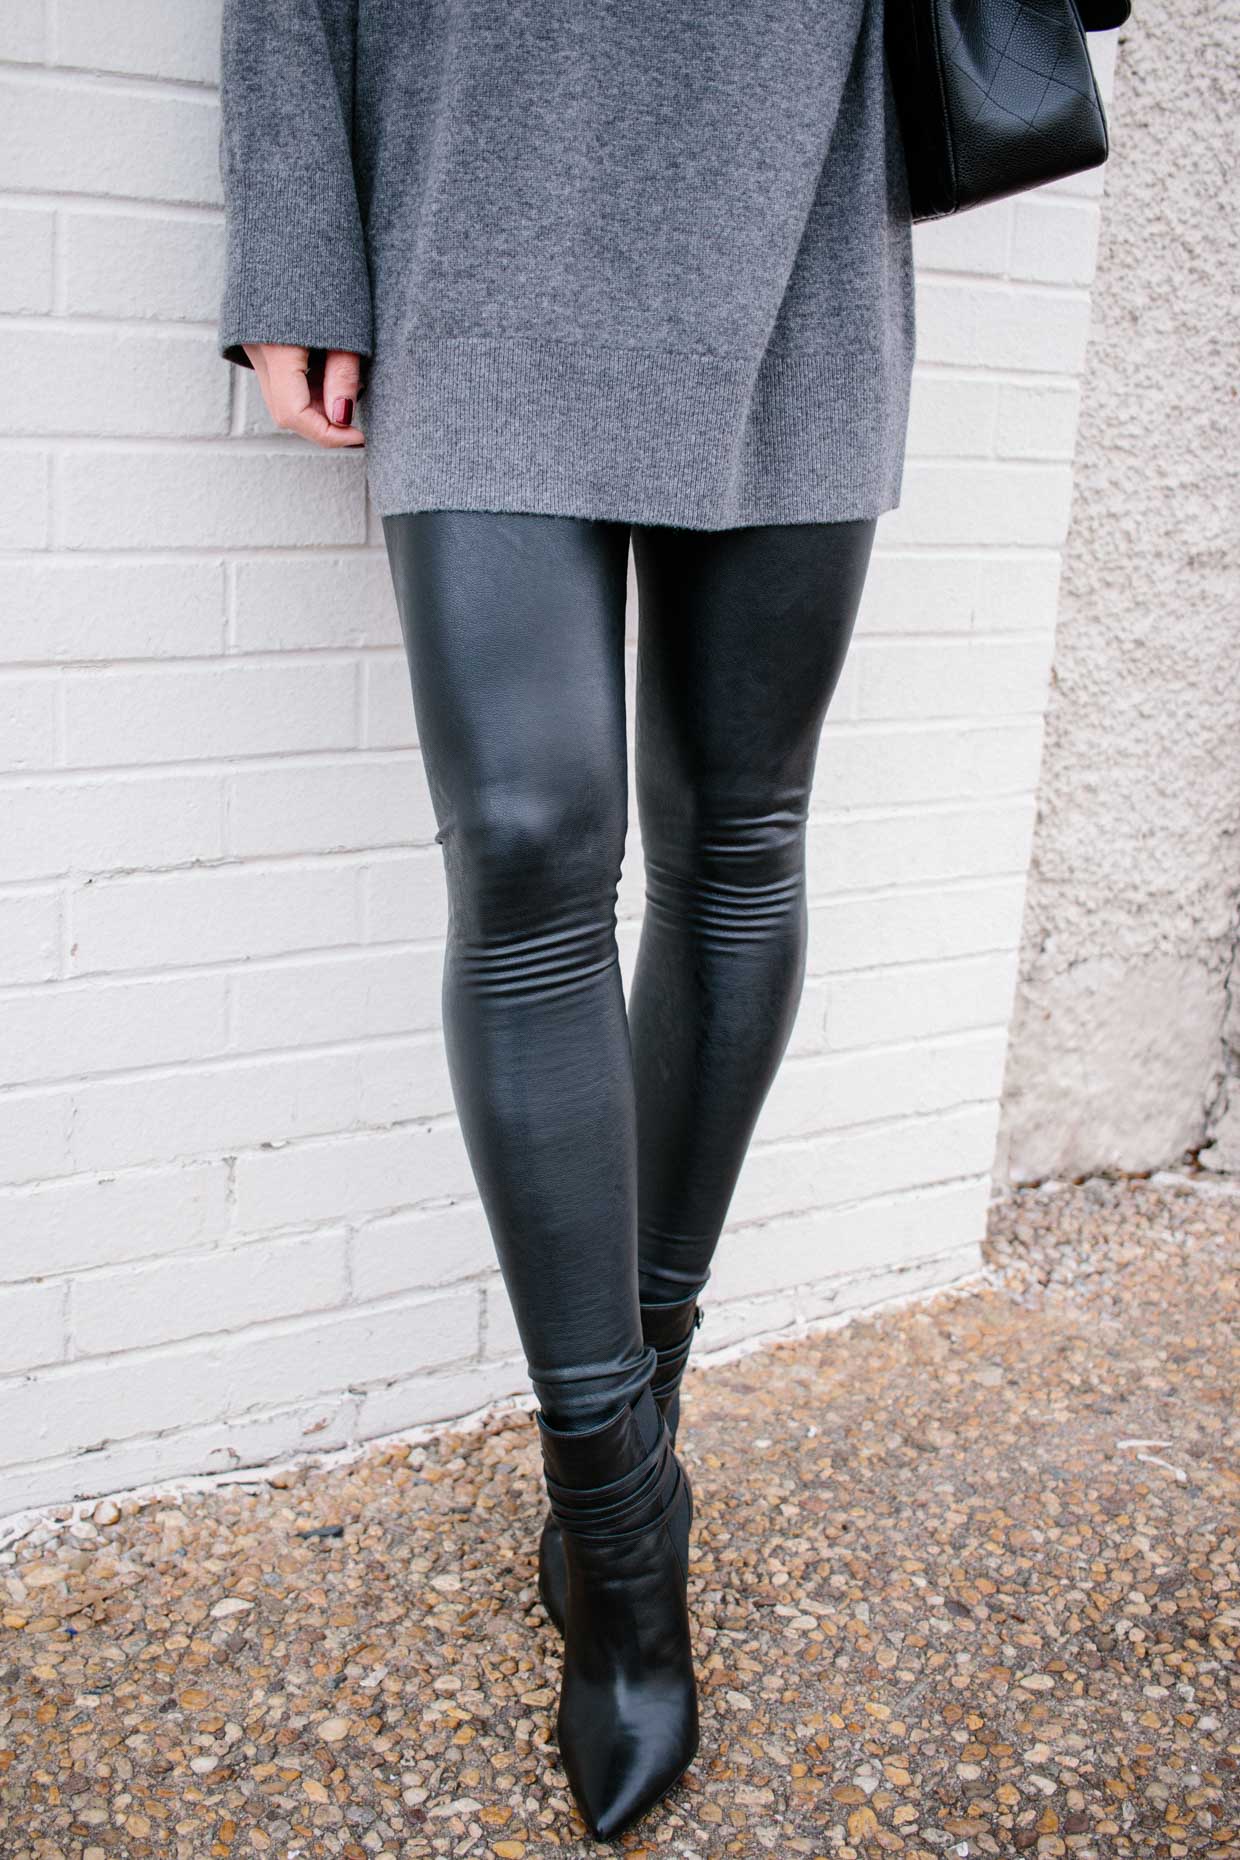 How to style the faux leather commando leggings for the weekend  Faux  leather leggings outfit, Leather leggings outfit, Shiny leggings outfit